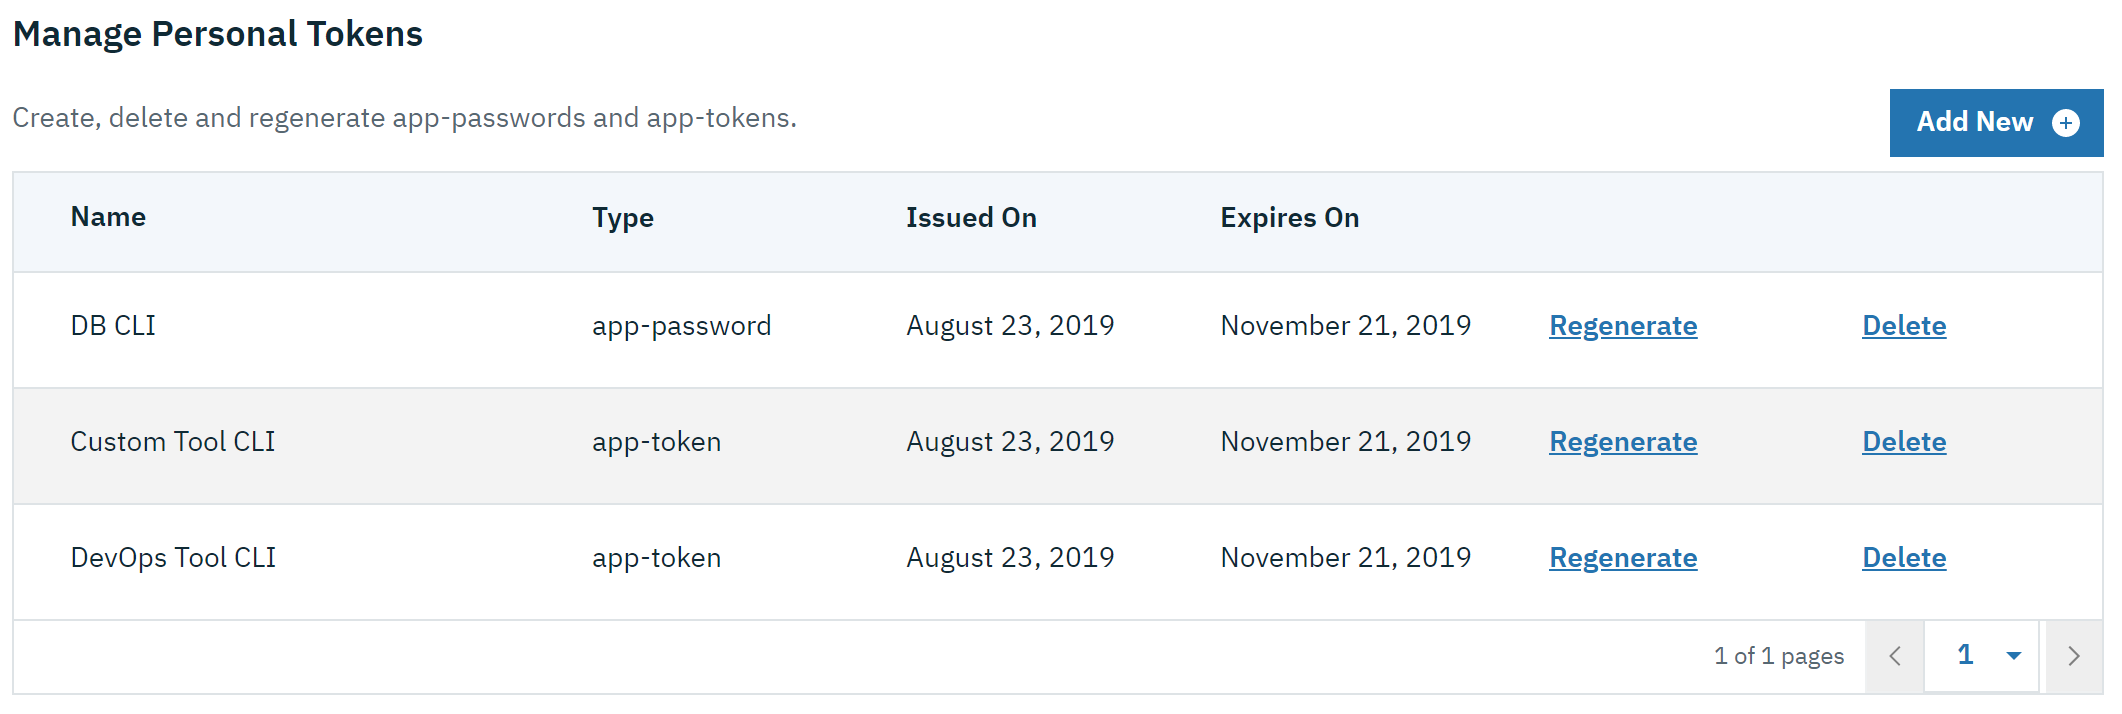 Manage personal tokens in Admin UI